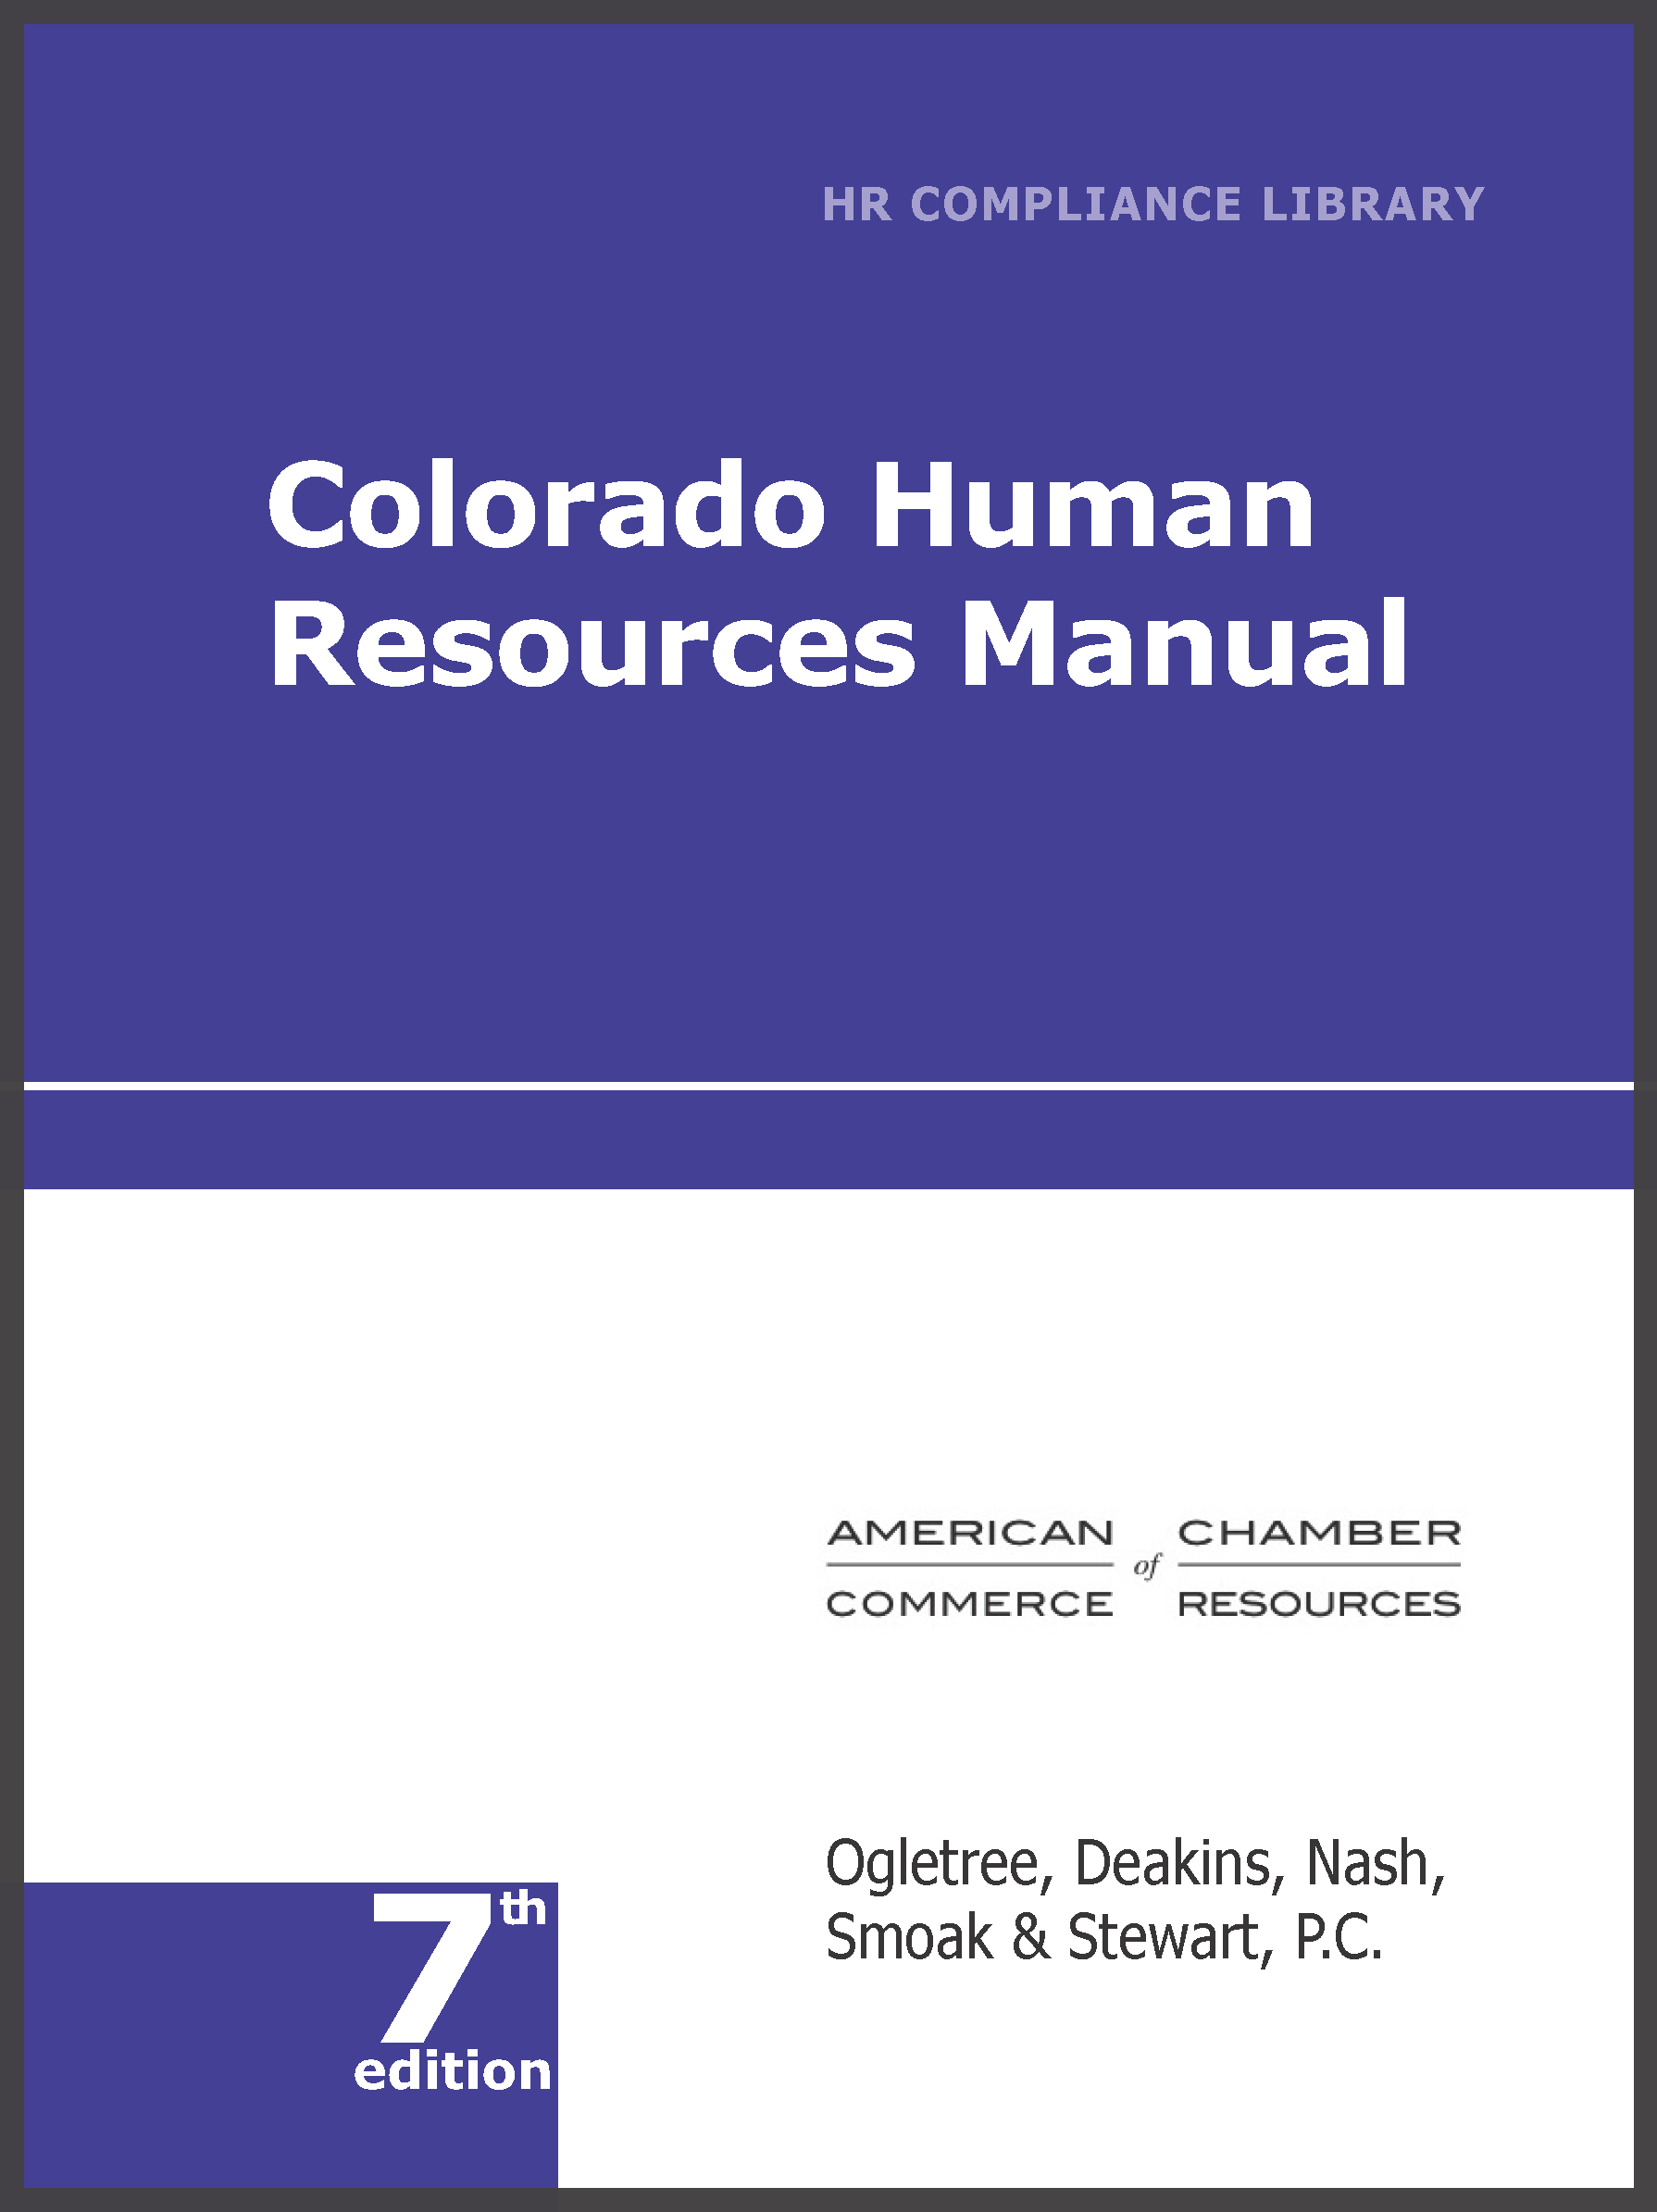 Colorado Human Resources Library—Online Only employment law image, remote work, labor laws, employment laws, right to work, order of protection, minimum wage